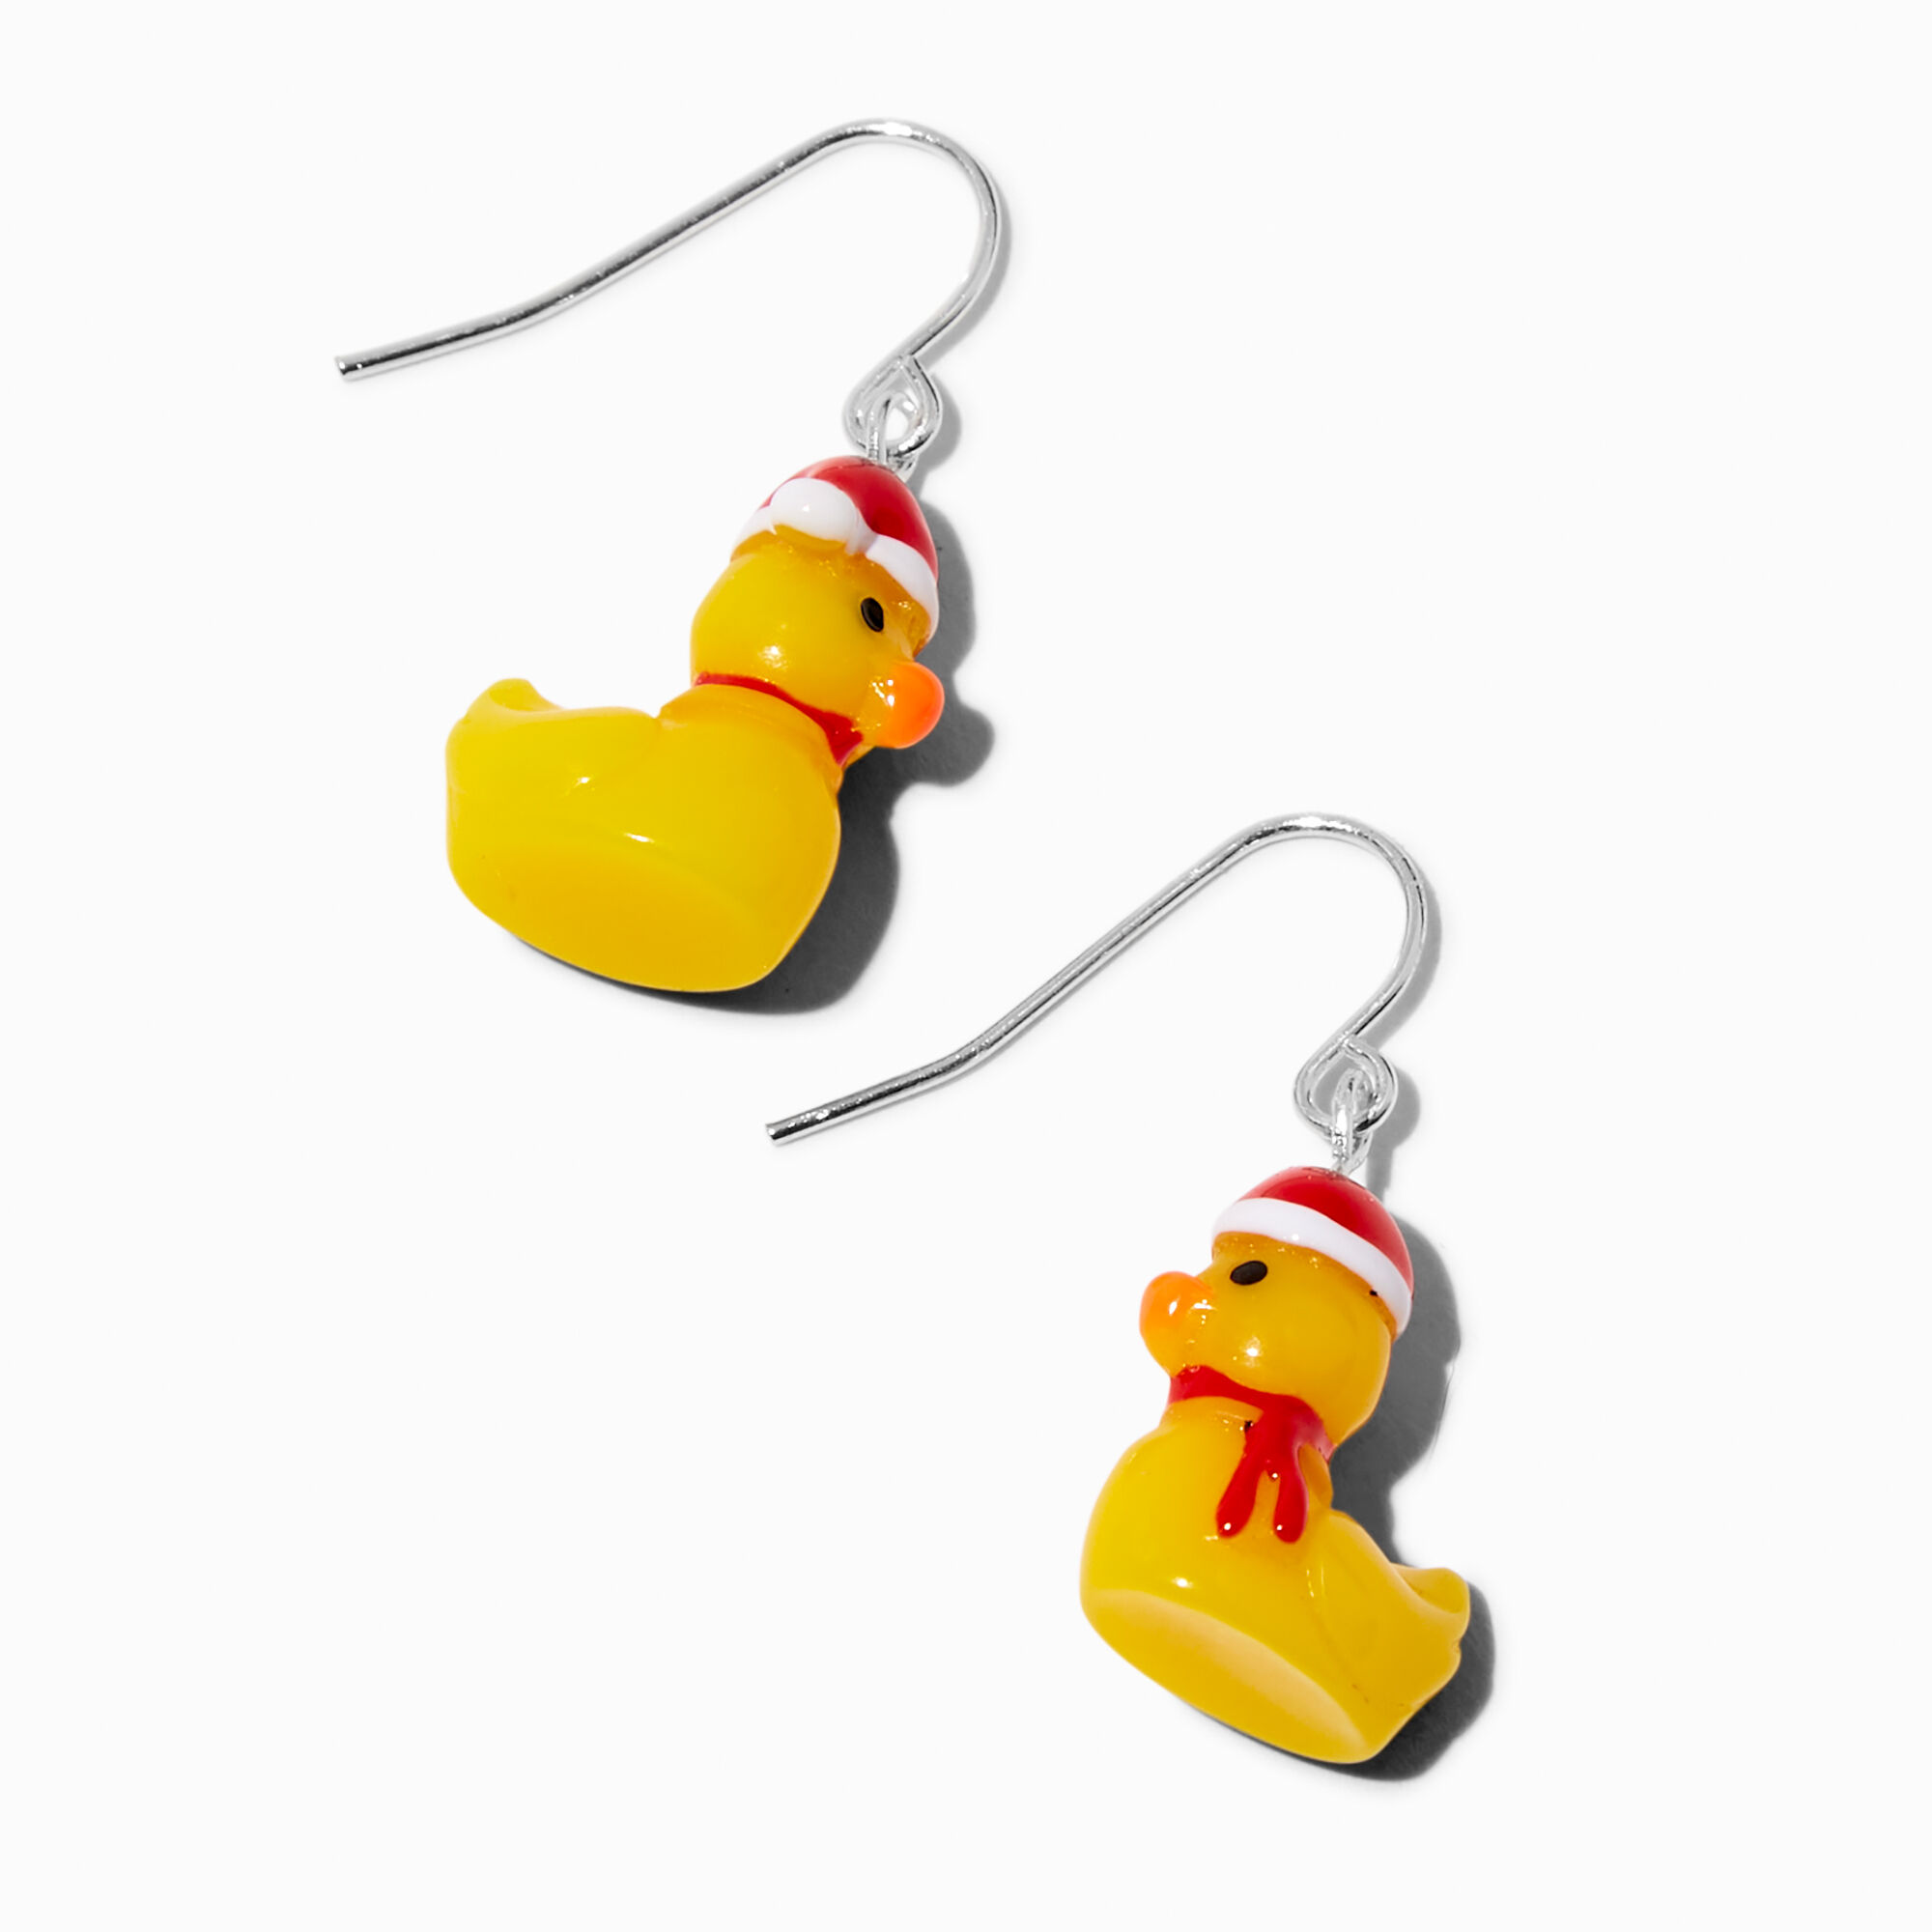 View Claires Santa Ducky 075 Drop Earrings Red information